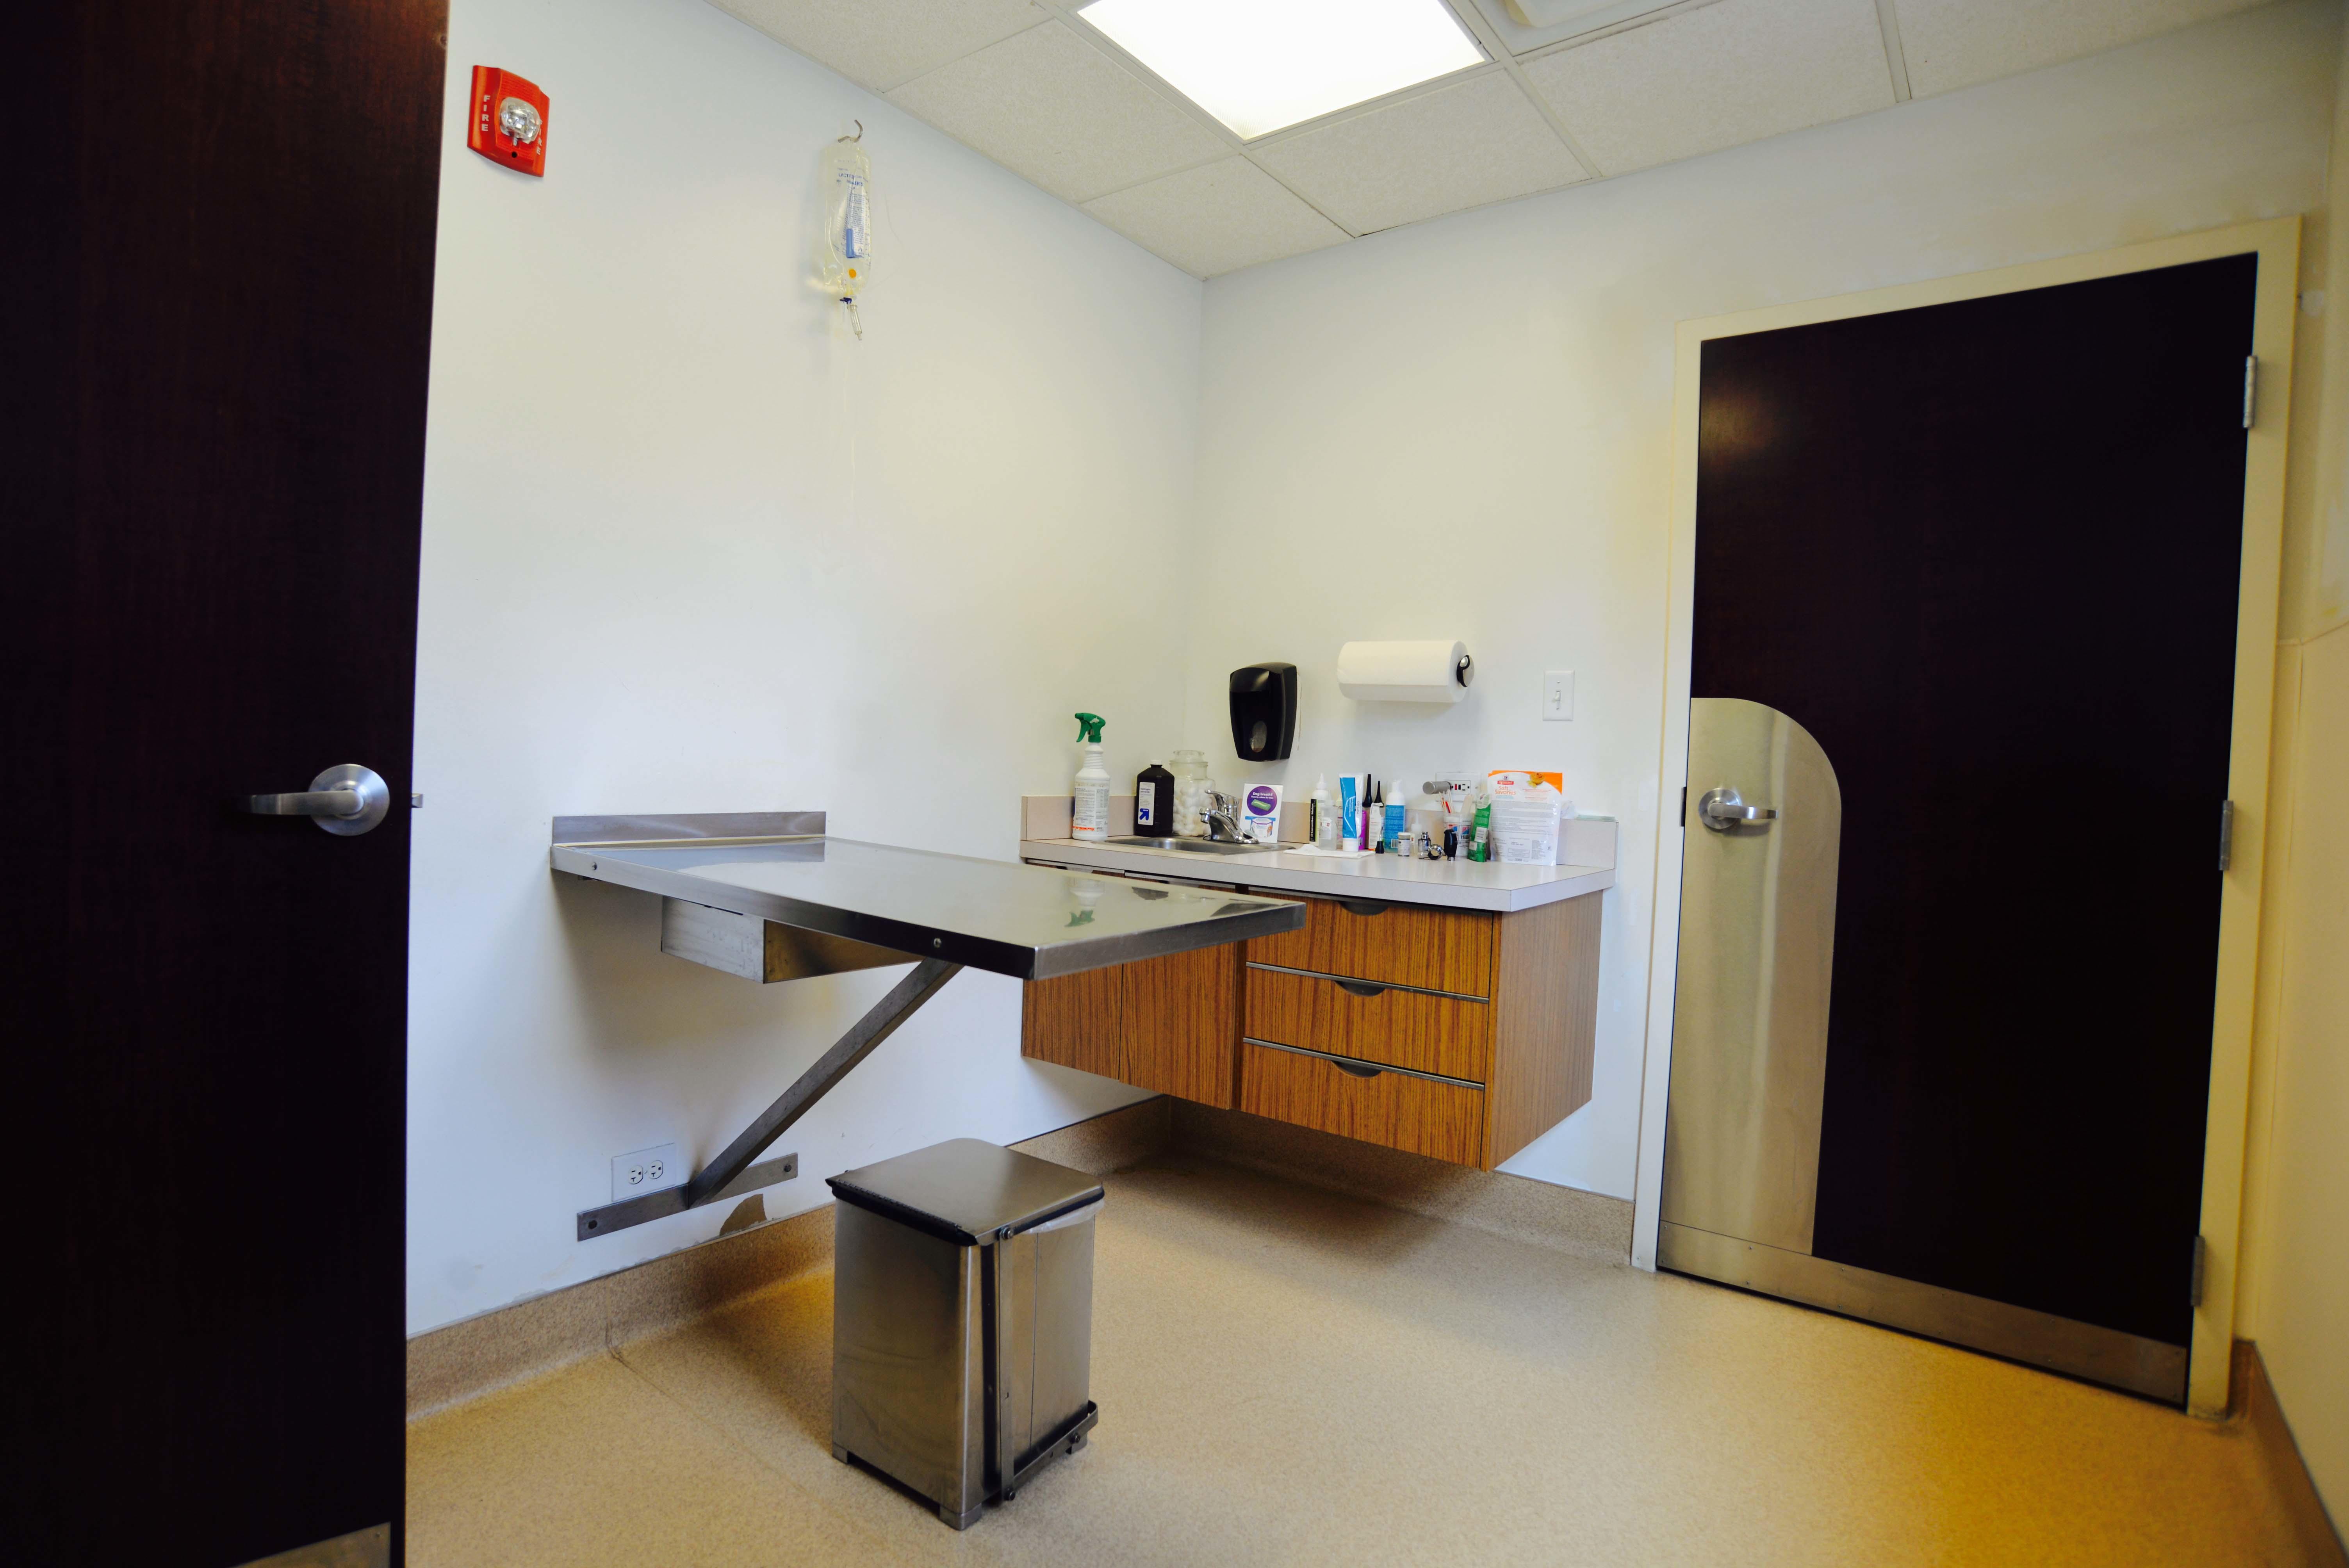 We pride ourselves on maintaining a bright, clean and welcoming facility. Archer Veterinary Clinic Lemont (630)257-5121